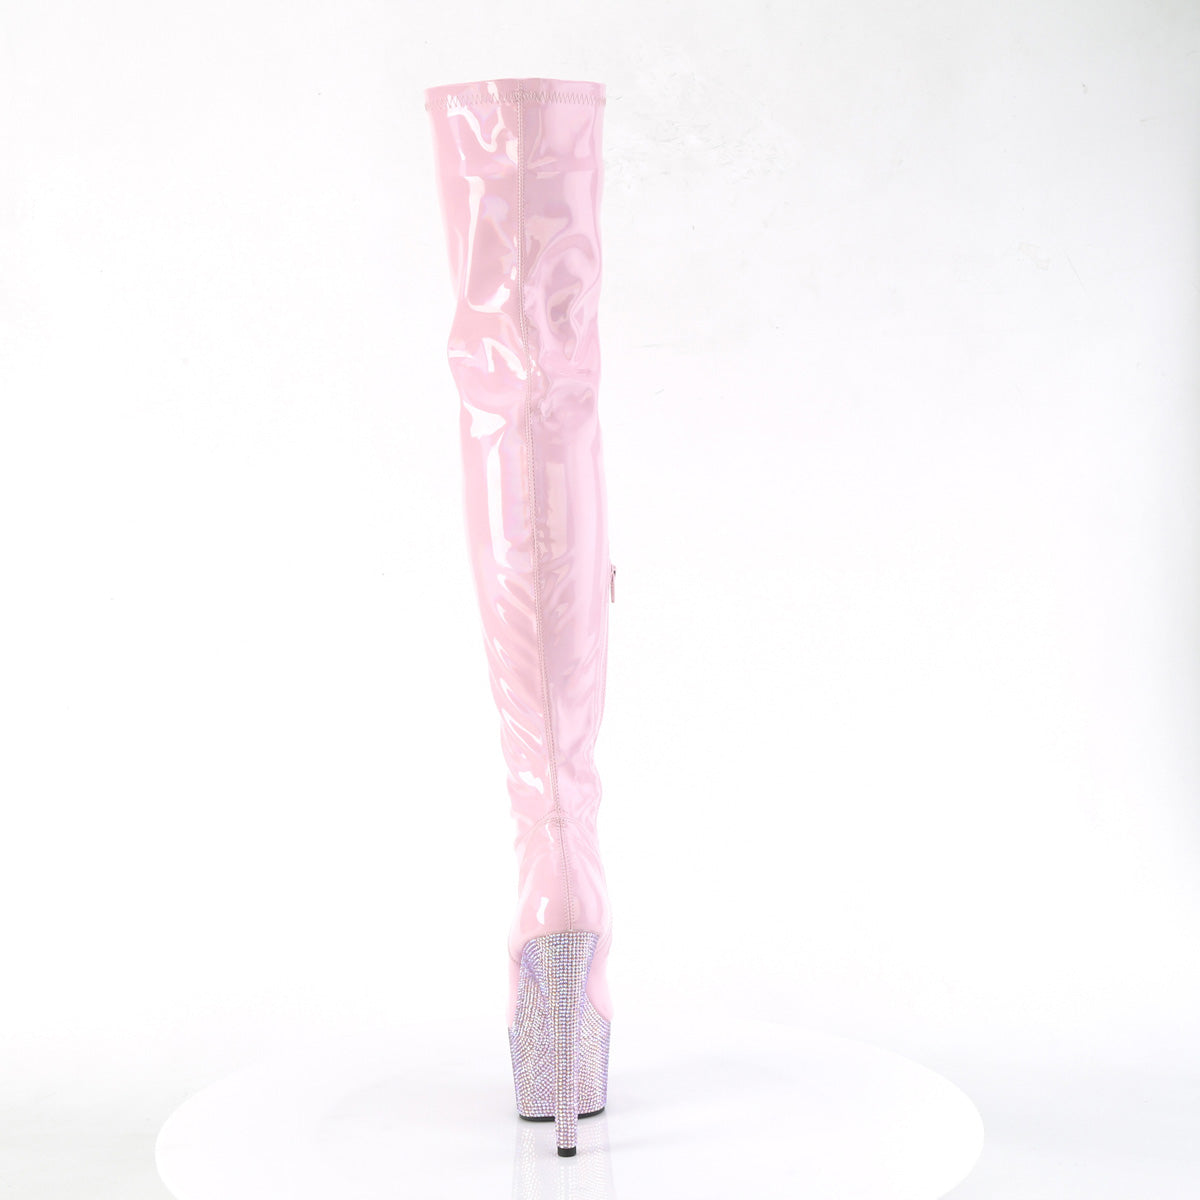 PLEASER BEJEWELED-3000-7 BABY PINK HOLOGRAM RHINESTONE 7 INCH THIGH HIGH BOOTS SIZE 8 USA